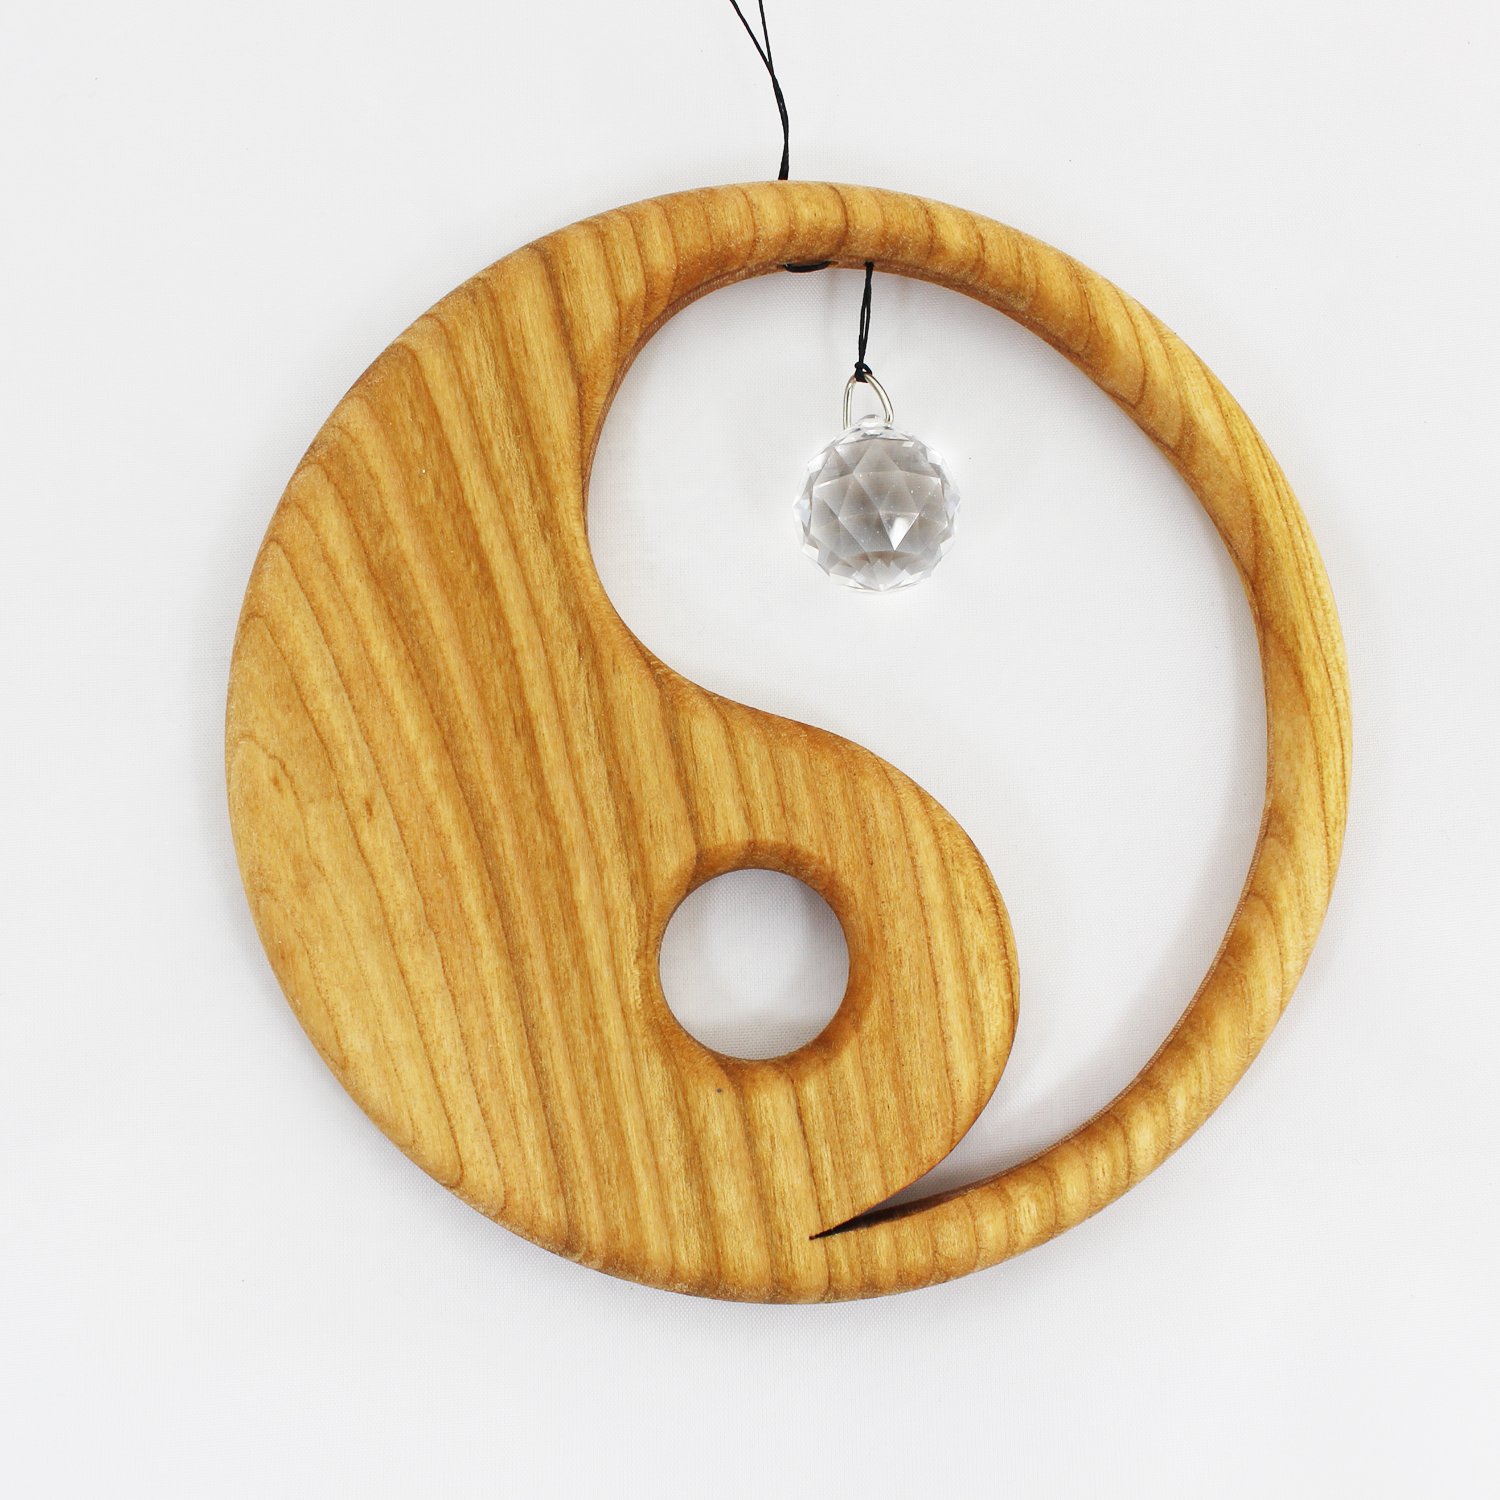 Wooden Hanger Yin Yang With Crystal 216